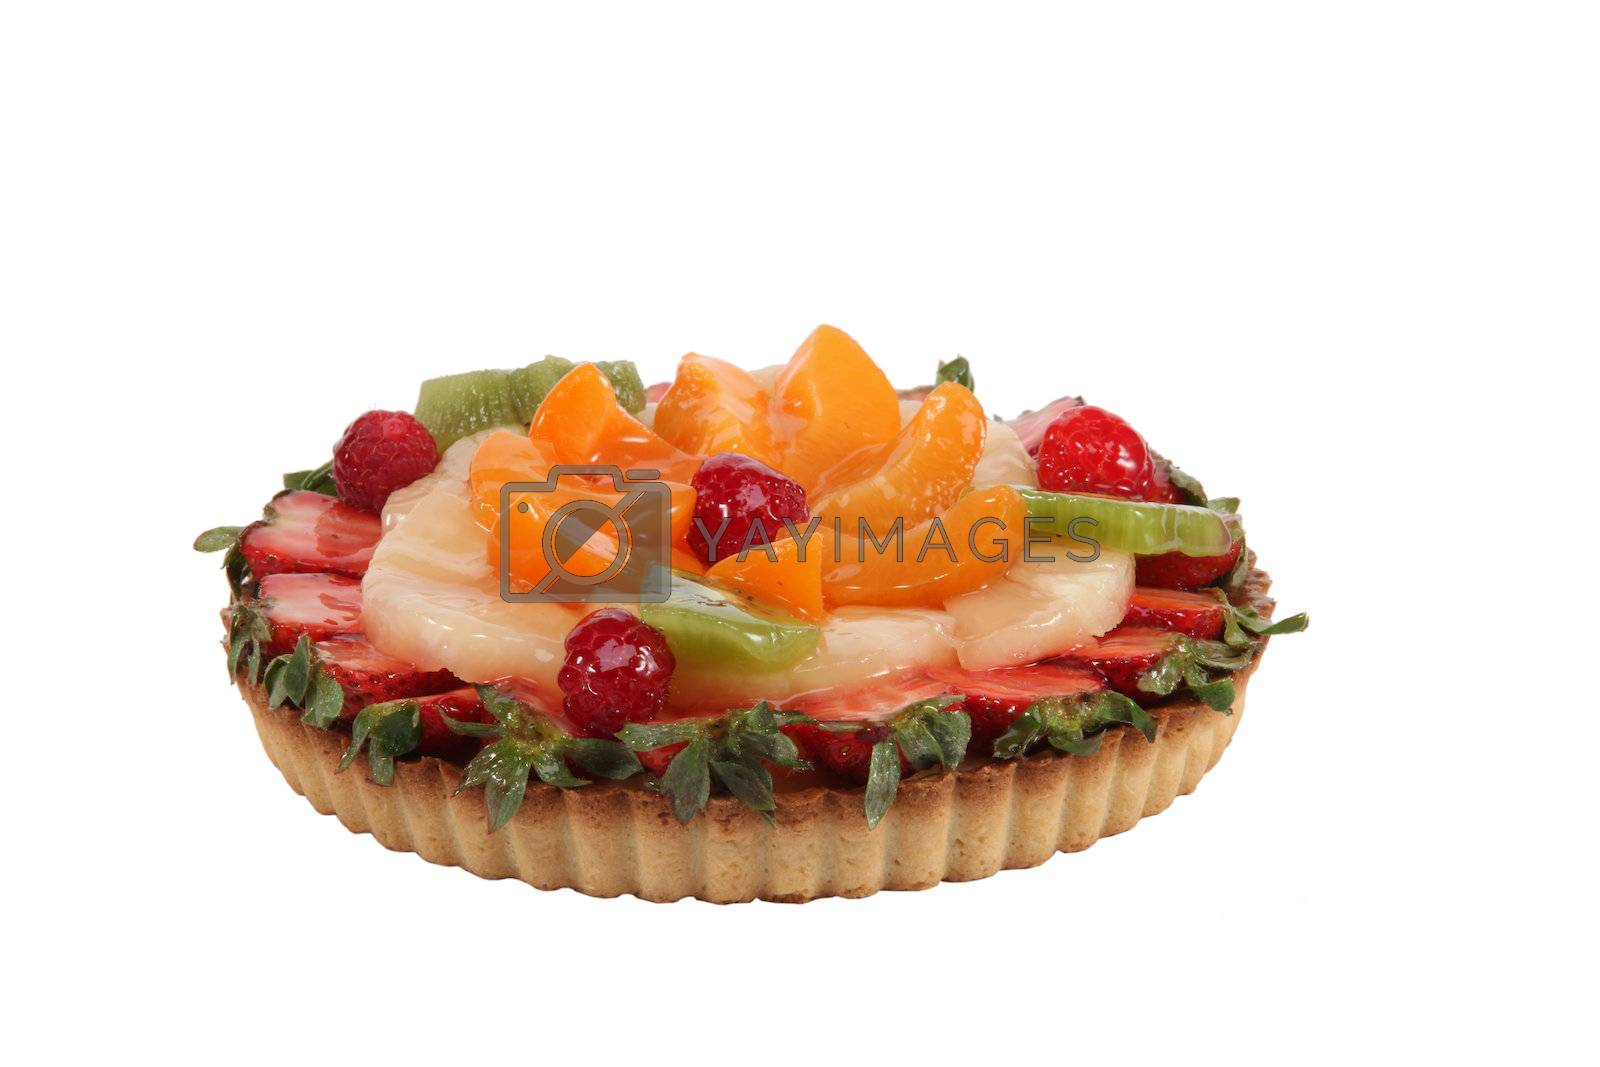 Royalty free image of Mixed fruit tart by phovoir